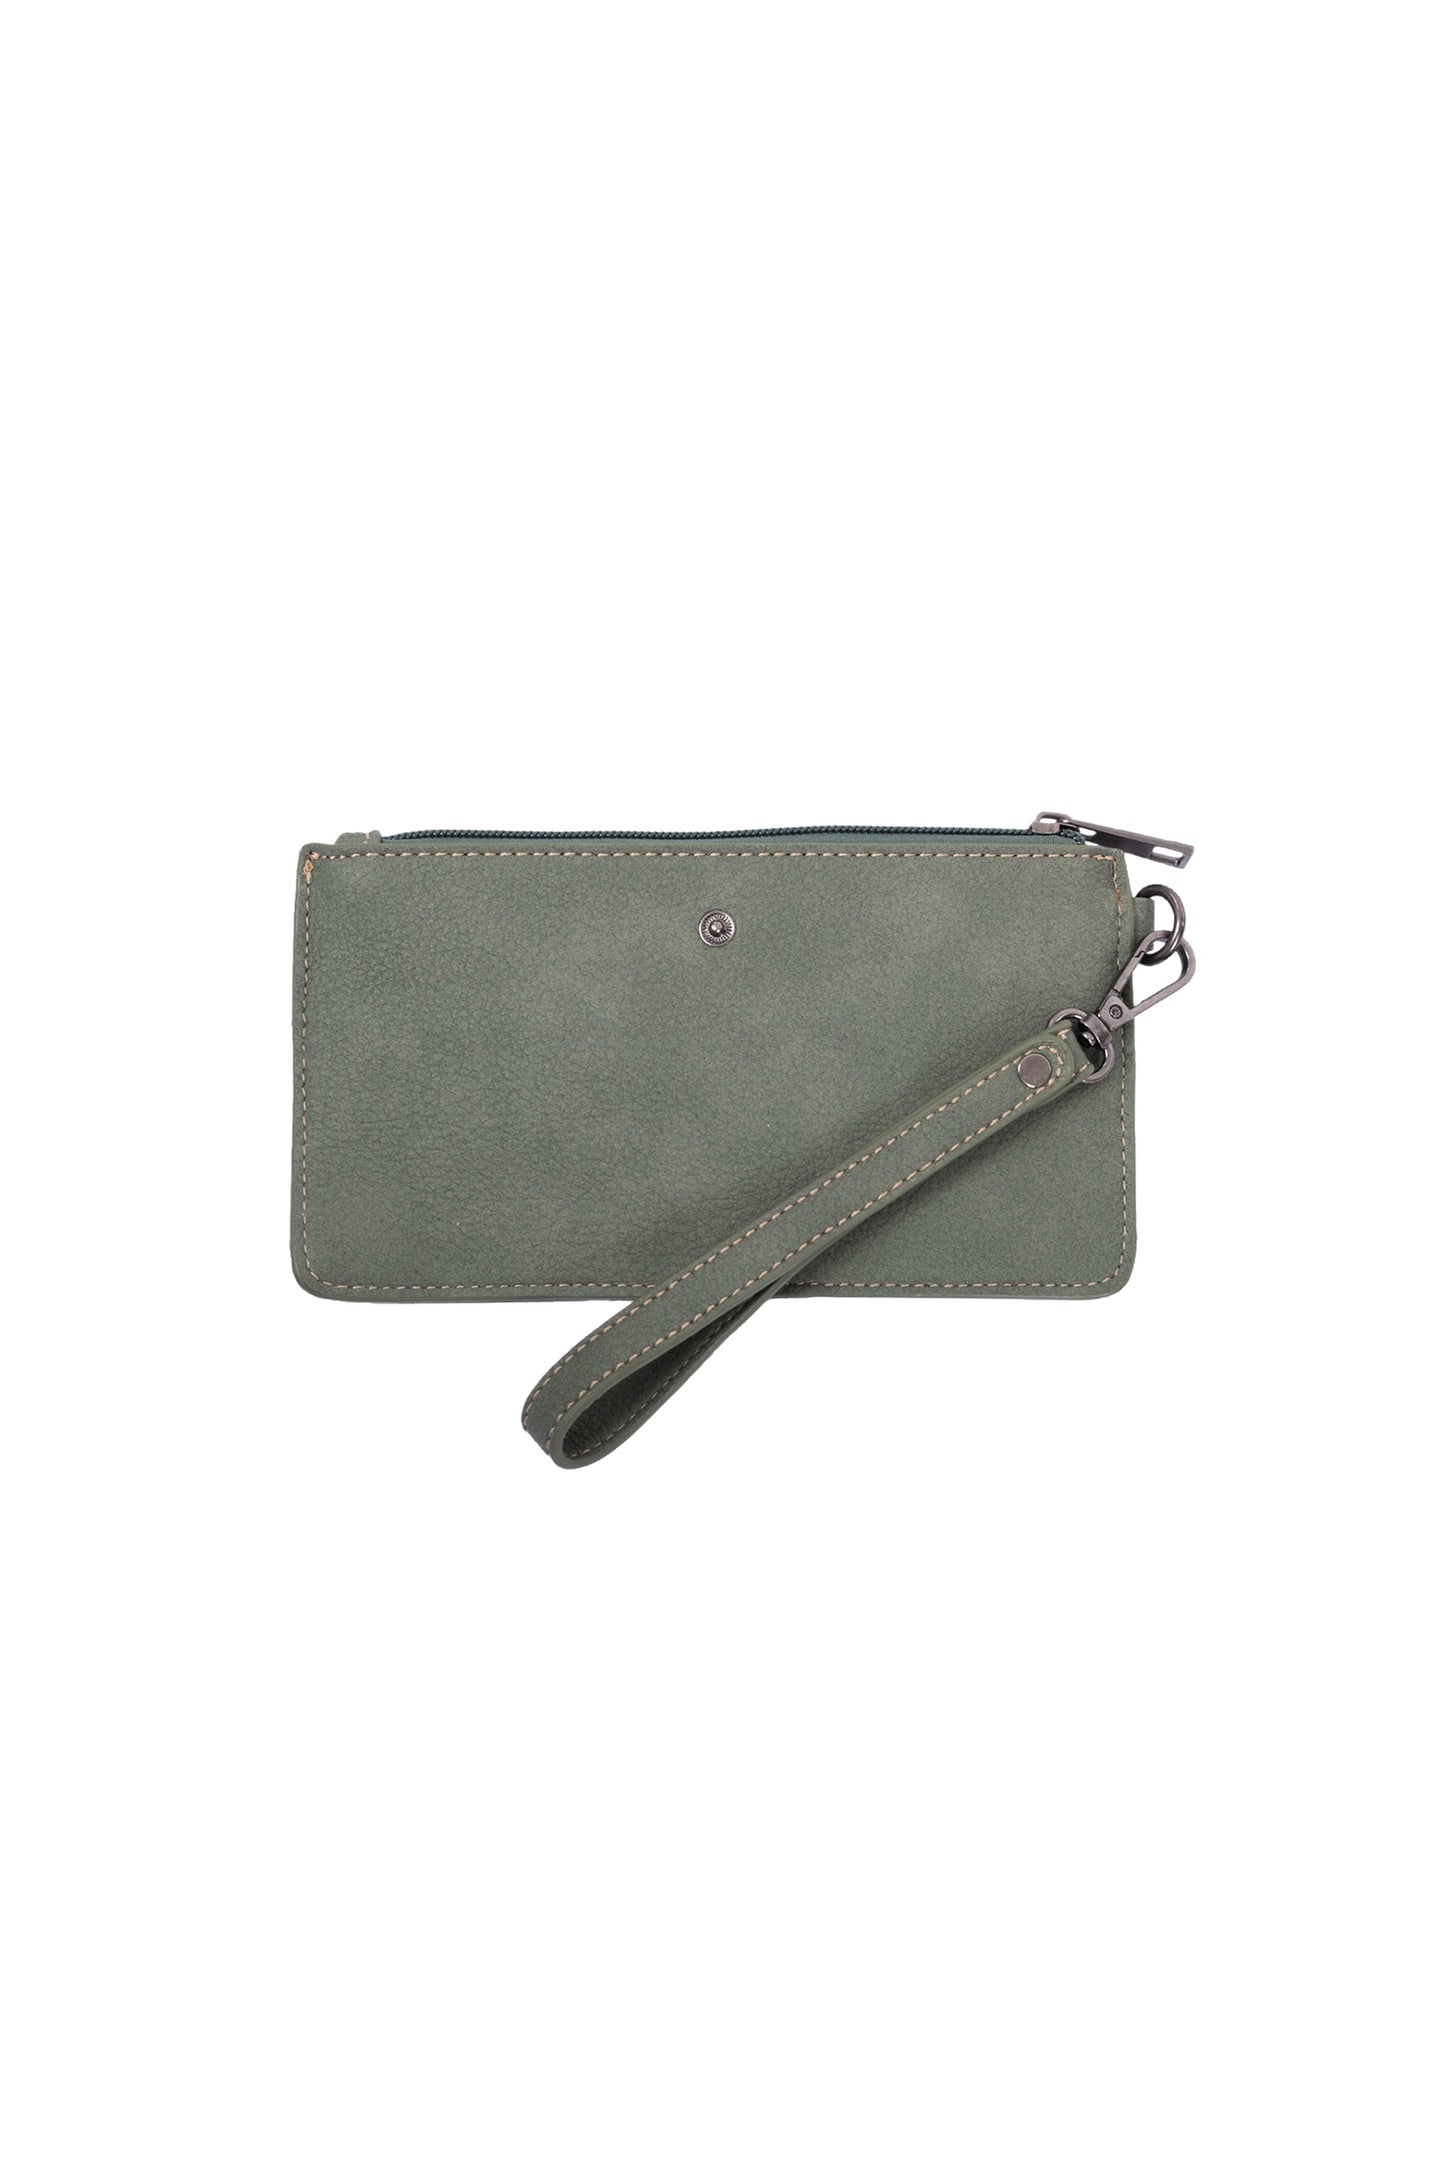 Pure Western Lola Wallet - Sage - P3S2930WLT